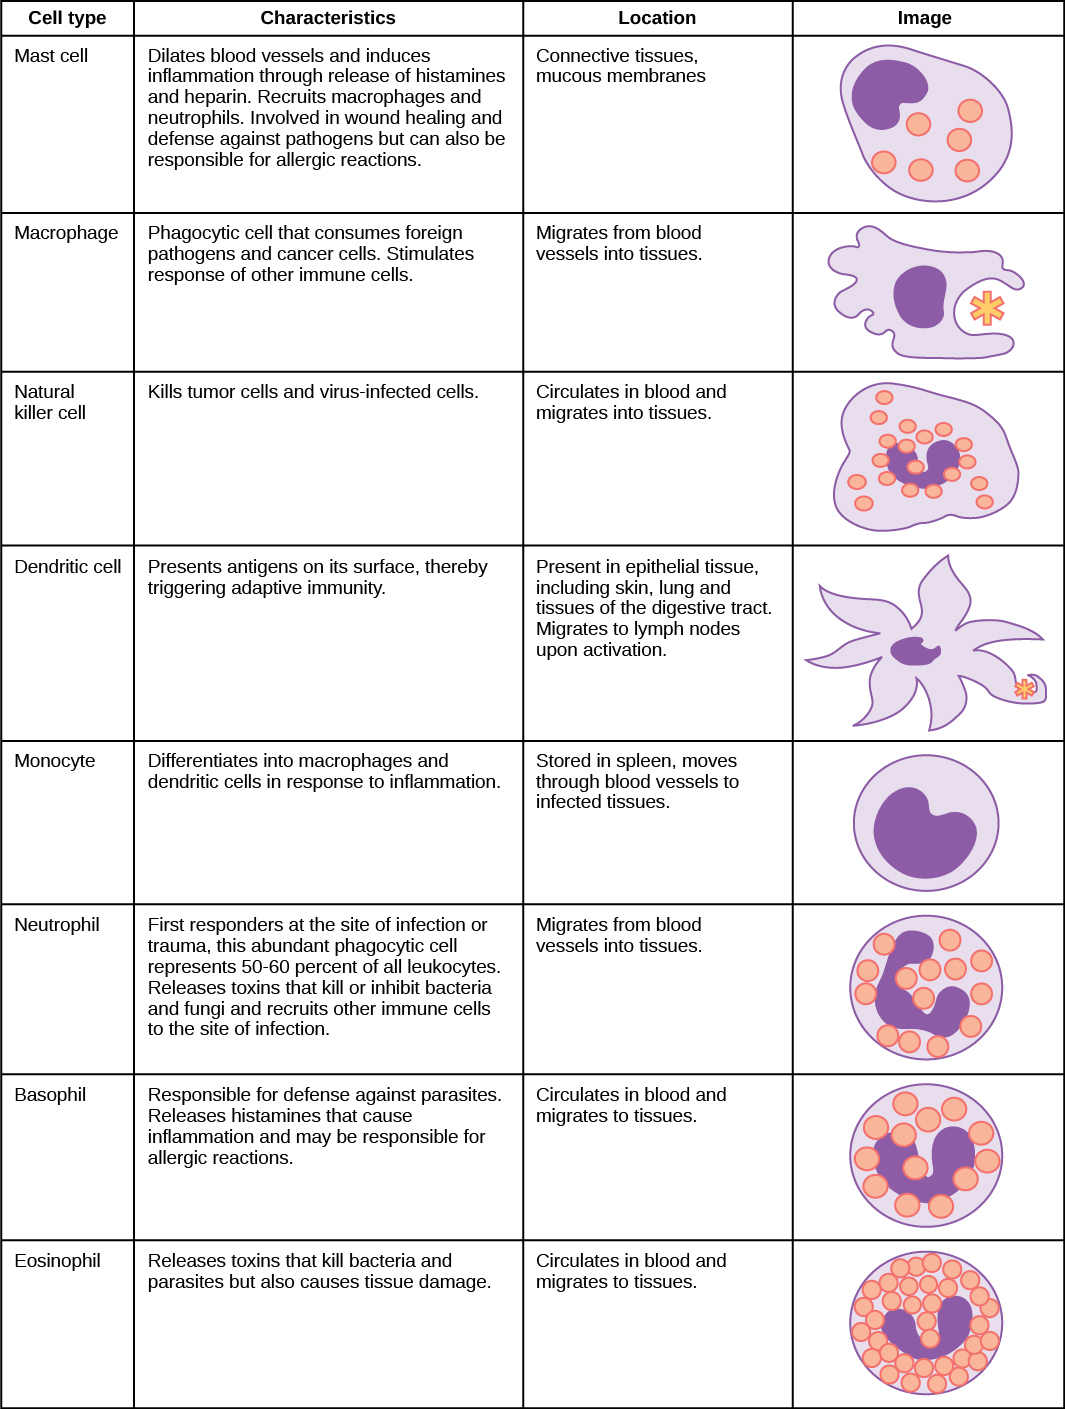  Table shows various types of white blood cells and describes their function. Mast cells, natural killer cells, neutrophils, basophils and eosinophils are all filled with granules and have a horseshoe-shaped nucleus. Macrophages are irregular in shape, with a round nucleus. Dendrites have star-like projections and a small horseshoe shaped nucleus. Mast cells dilate blood vessels and induce inflammation through release of histamines and heparin. They also recruit macrophages and neutrophils, and are involved in wound healing and defense against pathogens, but can also be responsible for allergic reactions. They are found in connective tissue and mucous membranes. Macrophages are phagocytic cells that consume foreign pathogens and cancer cells. They stimulate response of other immune cells and migrate from blood vessels into tissues. Natural killer cells kill tumor cells and virus-infected cells. They circulate in blood and migrate into tissues. Dendritic cells present antigens on their surface, thereby triggering adaptive immunity. They are present in tissues in epithelial tissue, including skin, lung and tissues of the digestive tract. Migrate to lymph nodes upon activation. Monocytes differentiate into macrophages and dendritic cells in response to inflammation. They are stored in spleen, move through blood vessels to infected tissues. Neutrophils are first responders at the site of infection or trauma, these abundant phagocytic cell representing 50-60% of all leukocytes. Release toxins that kill or inhibit bacteria and fungi and recruit other immune cells to the site of infection. They migrate from blood vessels into tissues. Basophils are responsible for defense against parasites. They release histamines that cause inflammation and may be responsible for allergic reactions. They circulate in blood and migrate to tissues. Eosinophils release toxins that kill bacteria and parasites but also causes tissue damage. They circulate in blood and migrate to tissues.